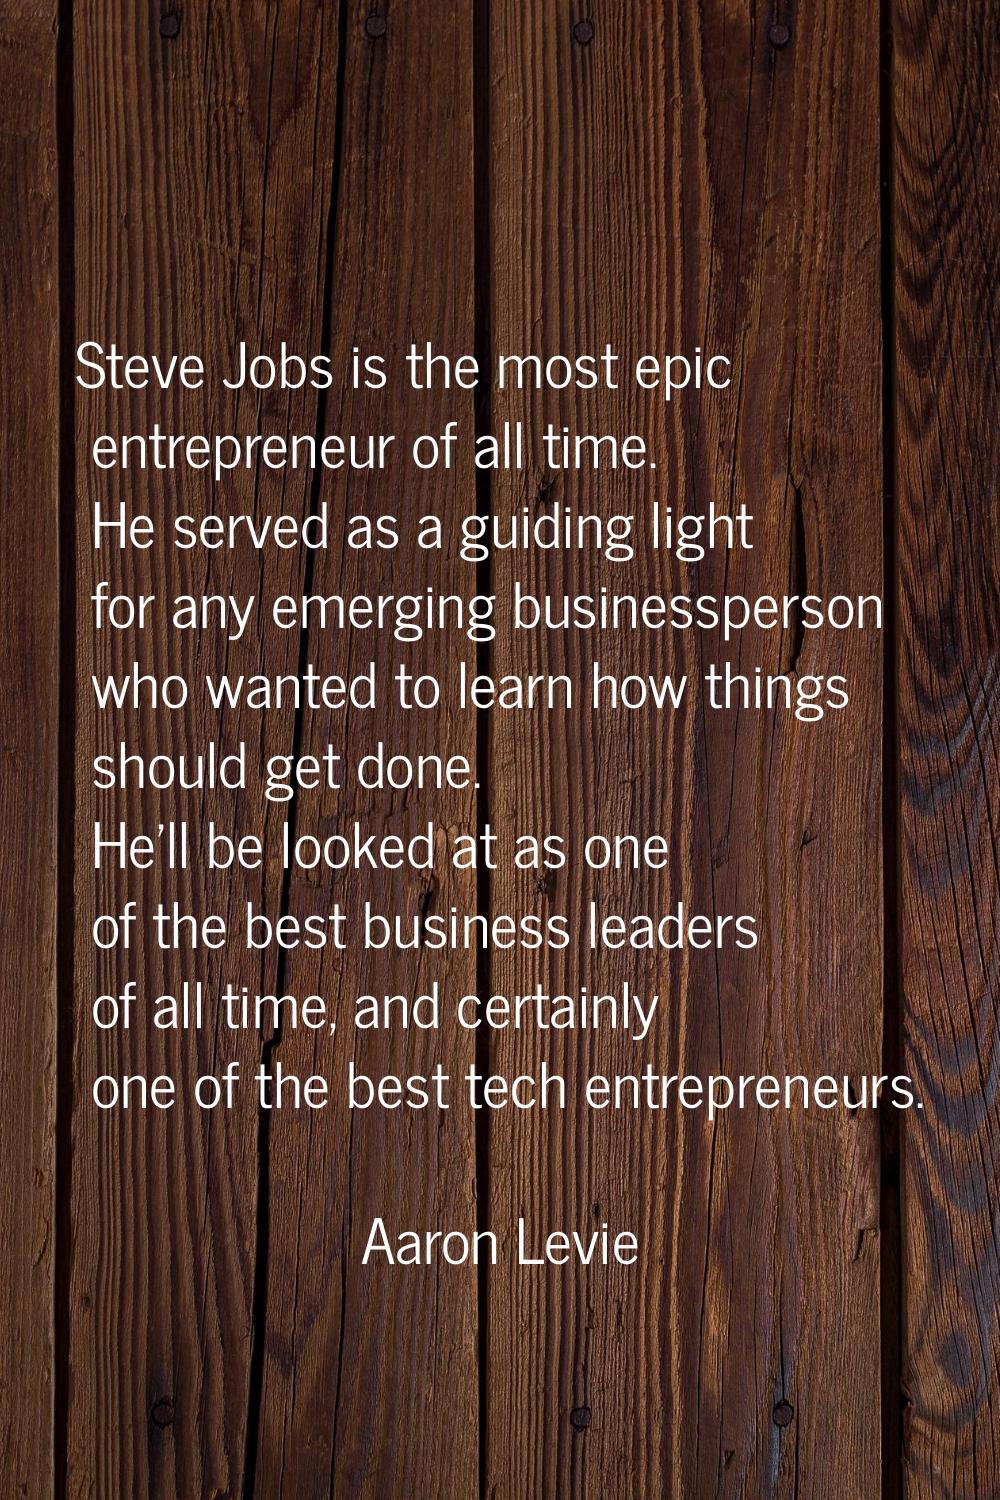 Steve Jobs is the most epic entrepreneur of all time. He served as a guiding light for any emerging